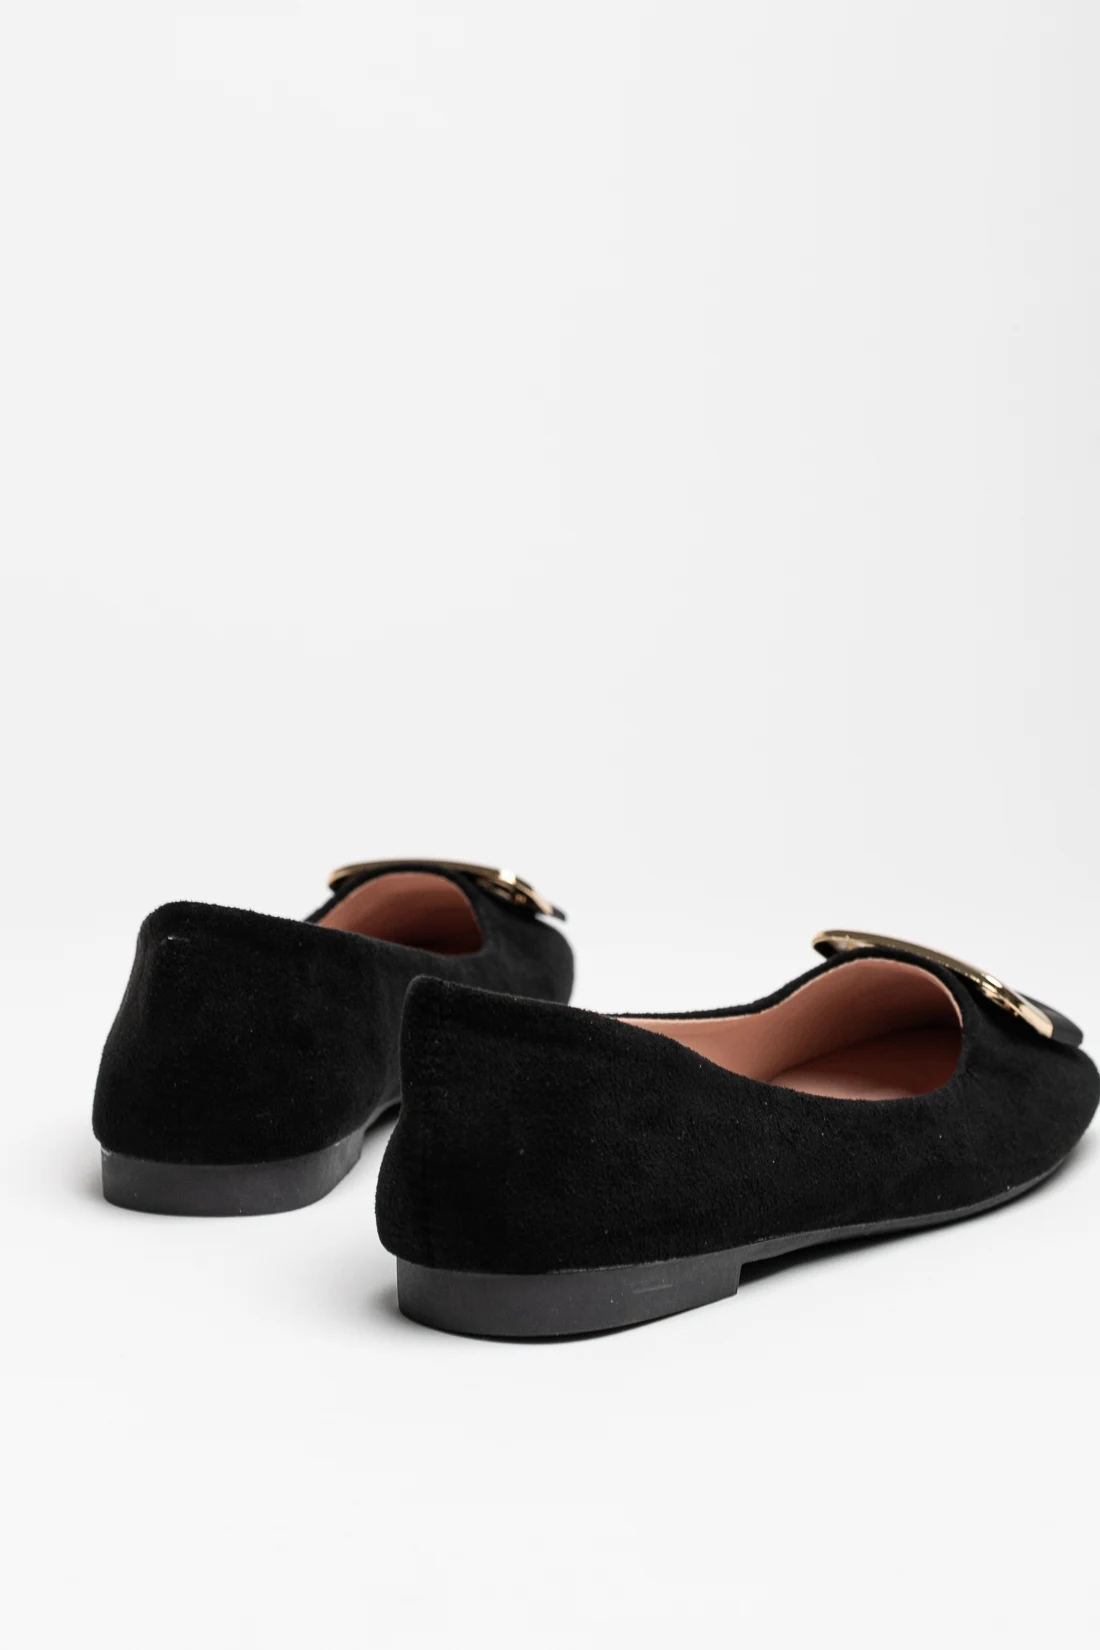 CHAUSSURES PLATES AMELY - NOIR